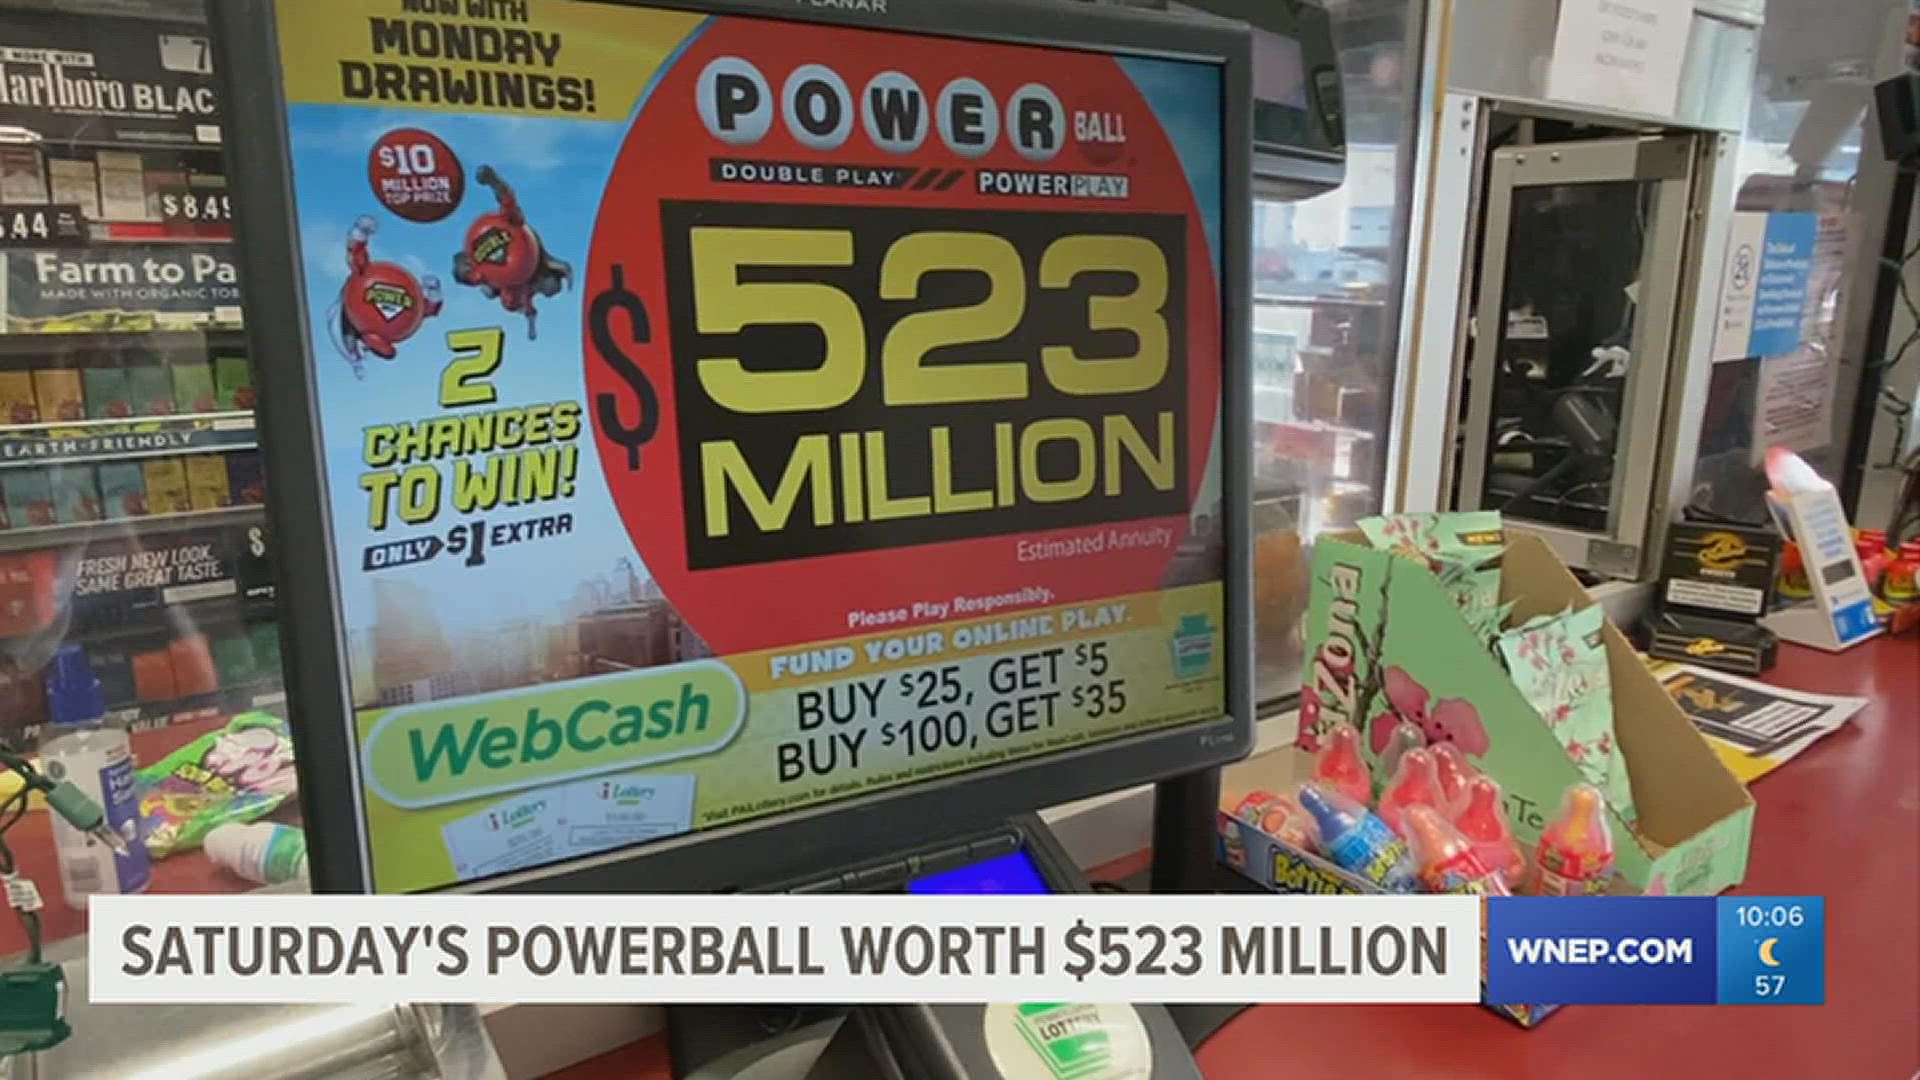 Saturday's Powerball drawing is worth over $500 million.